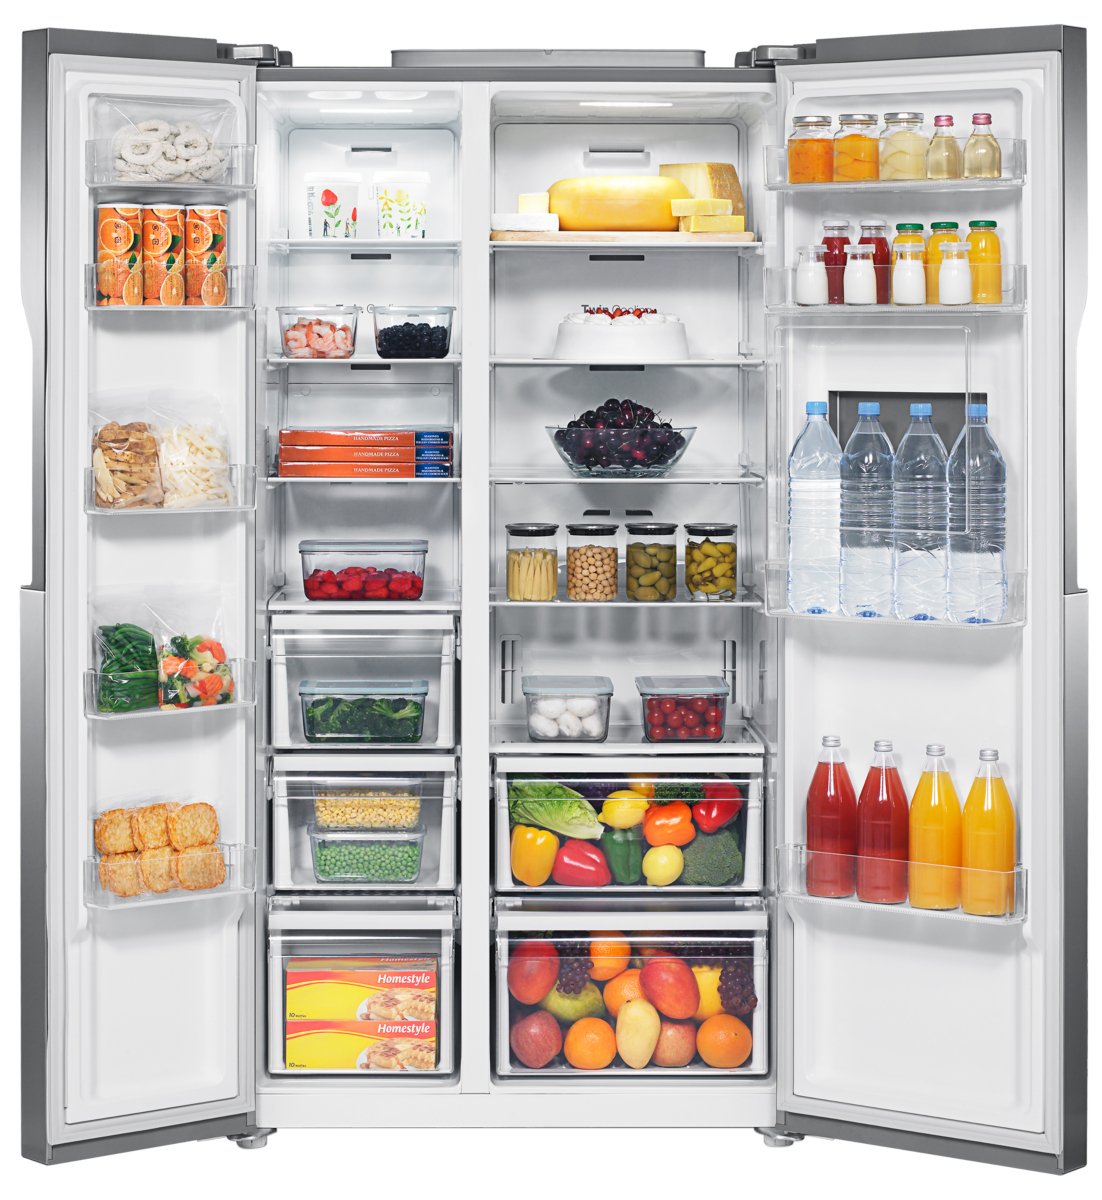 James Harrison invented the first industrial refrigerator in the 1850s. It’s come a long way since! #OzFirsts